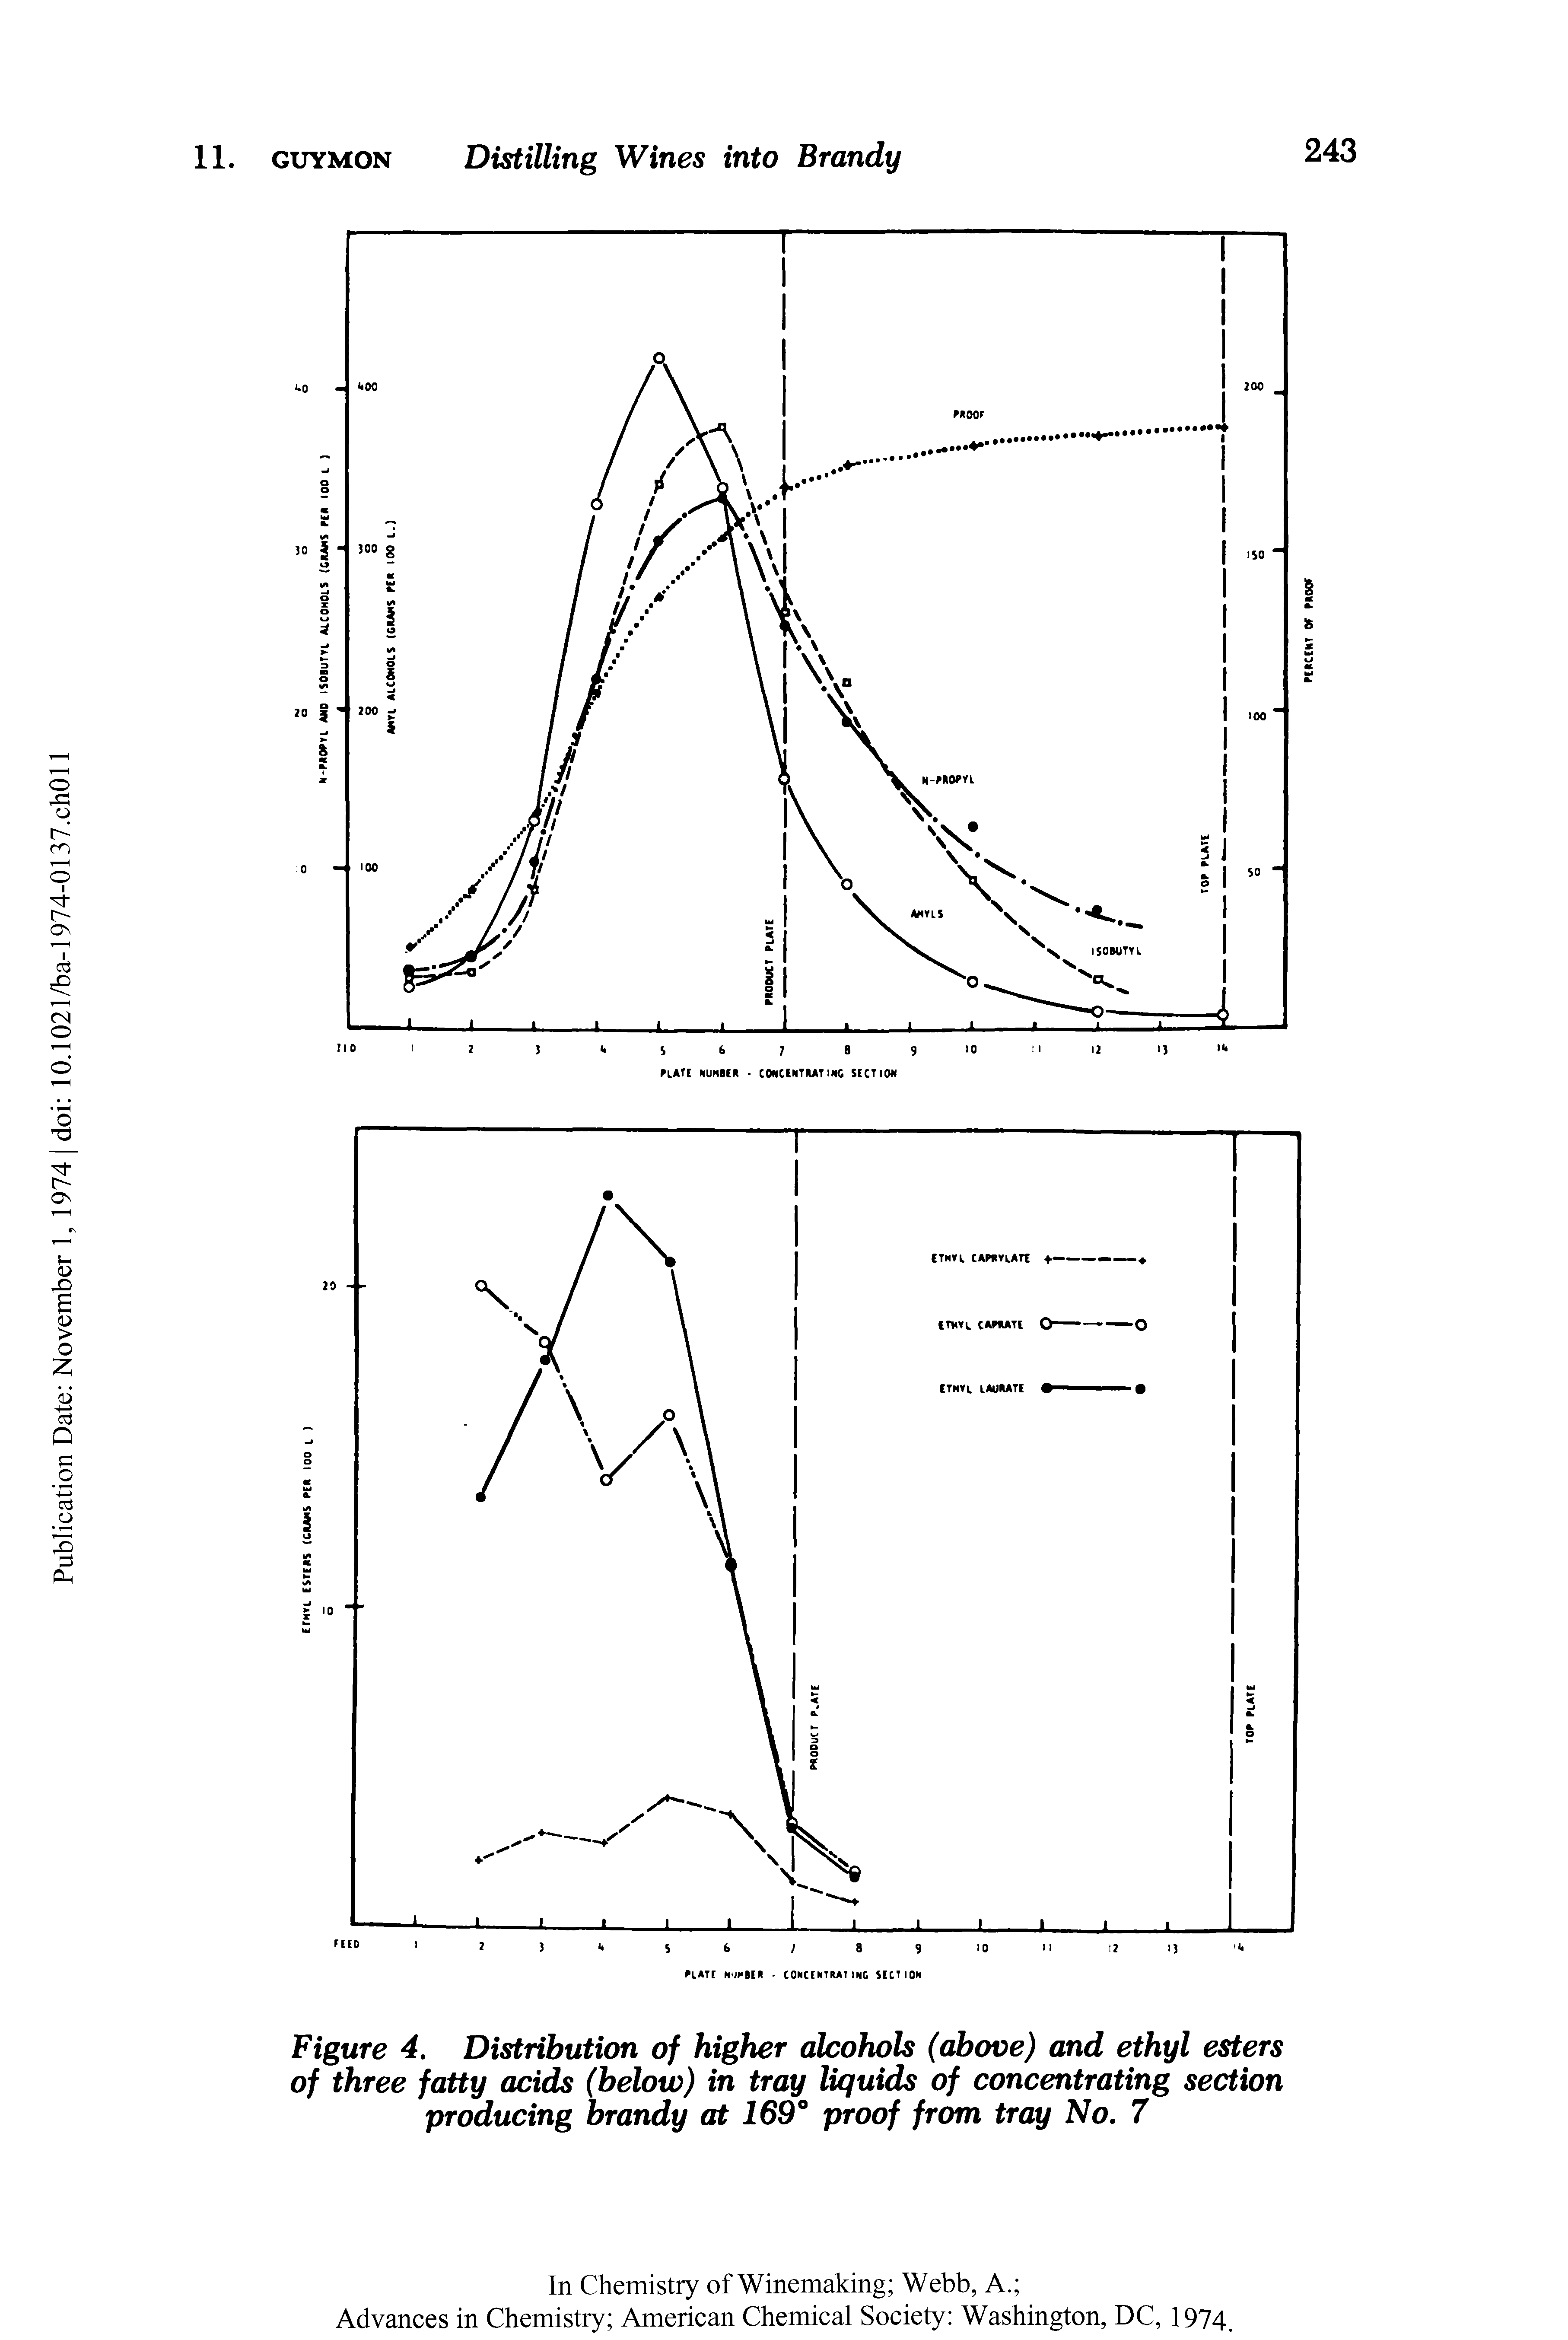 Figure 4. Distribution of higher alcohols (above) and ethyl esters of three fatty acids (below) in tray liquids of concentrating section producing brandy at 169° proof from tray No. 7...